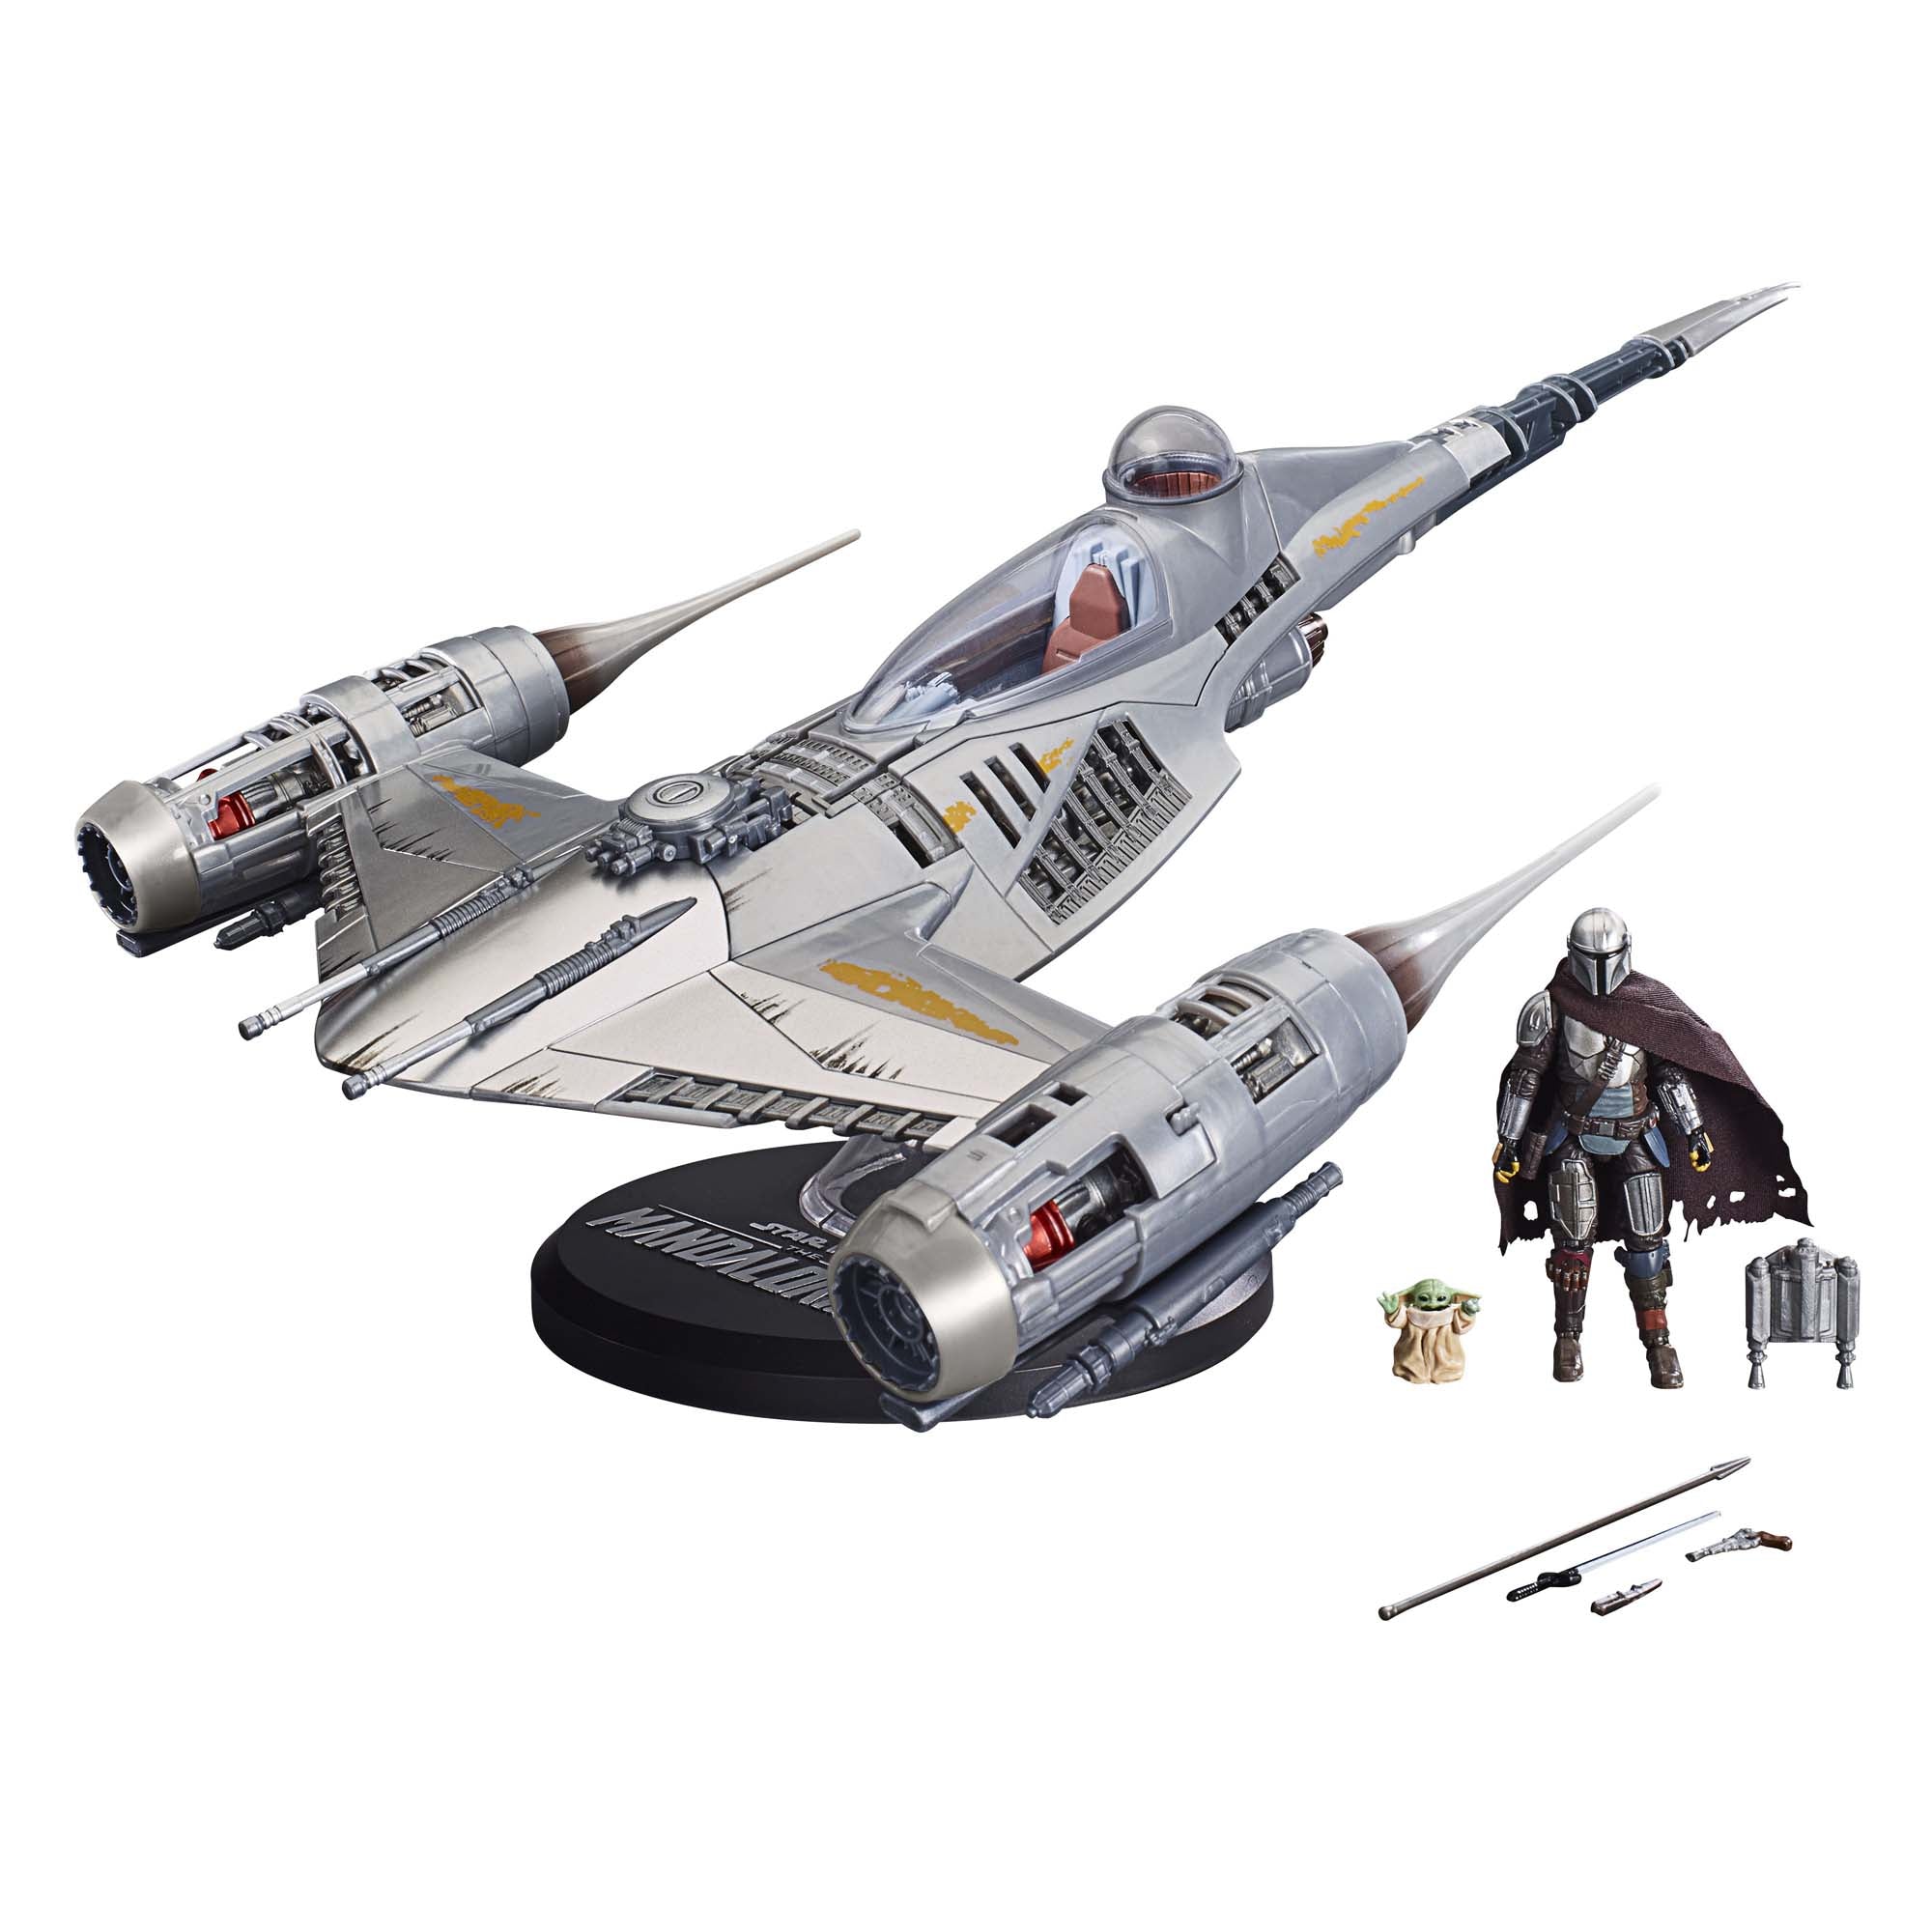 Star Wars Vintage Collection (The Mandalorian) N-1 Starfighter